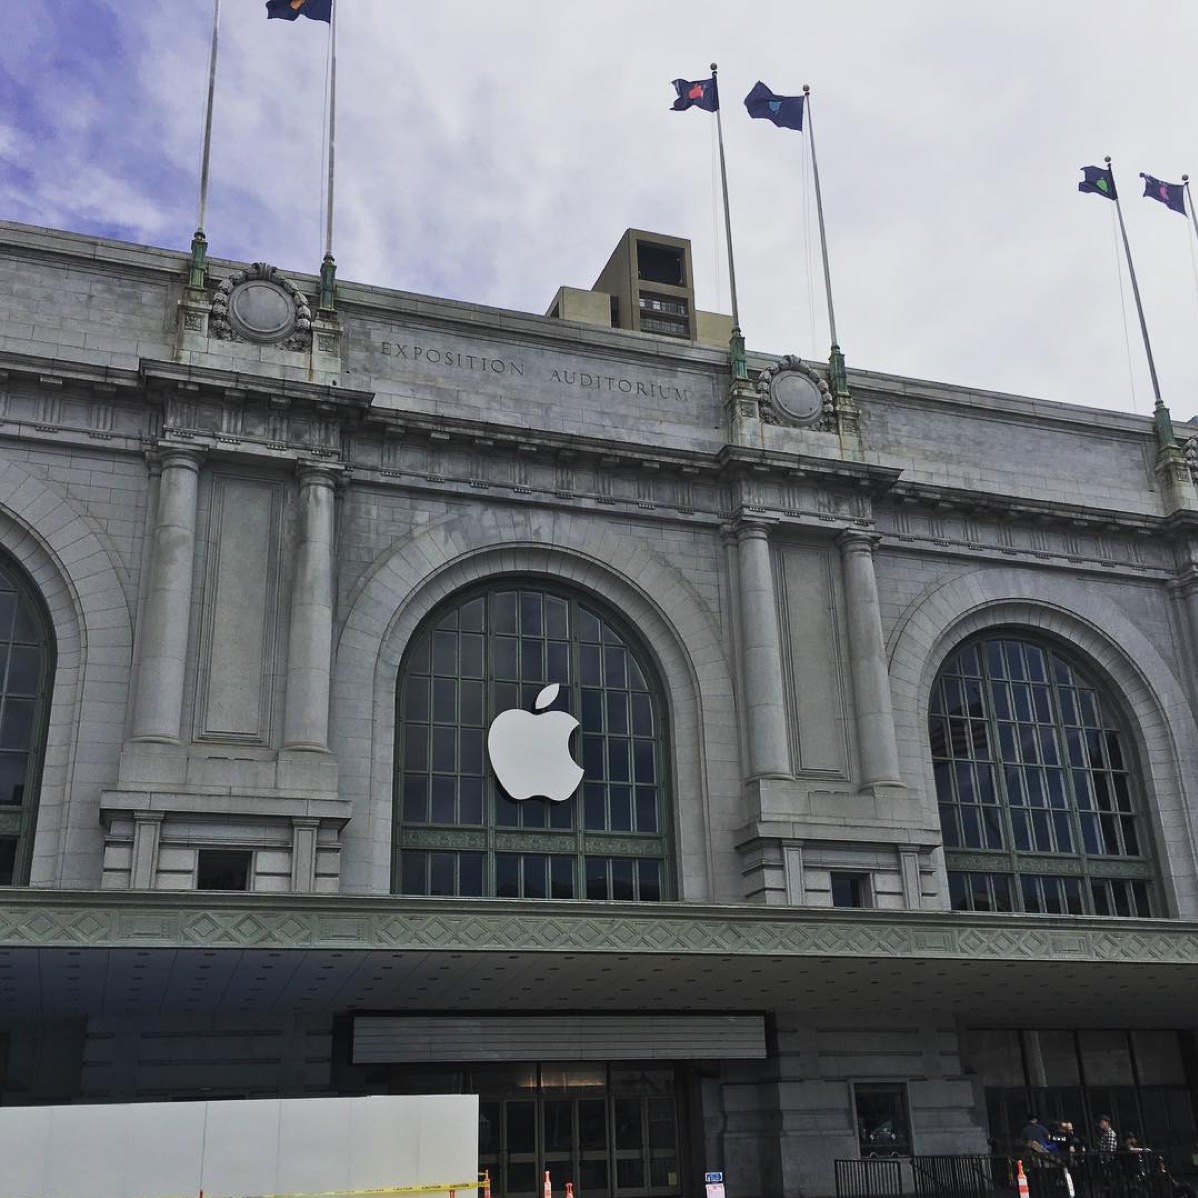 WWDC Decorations Go Up at Moscone West and Bill Graham Civic Auditorium [Photos]